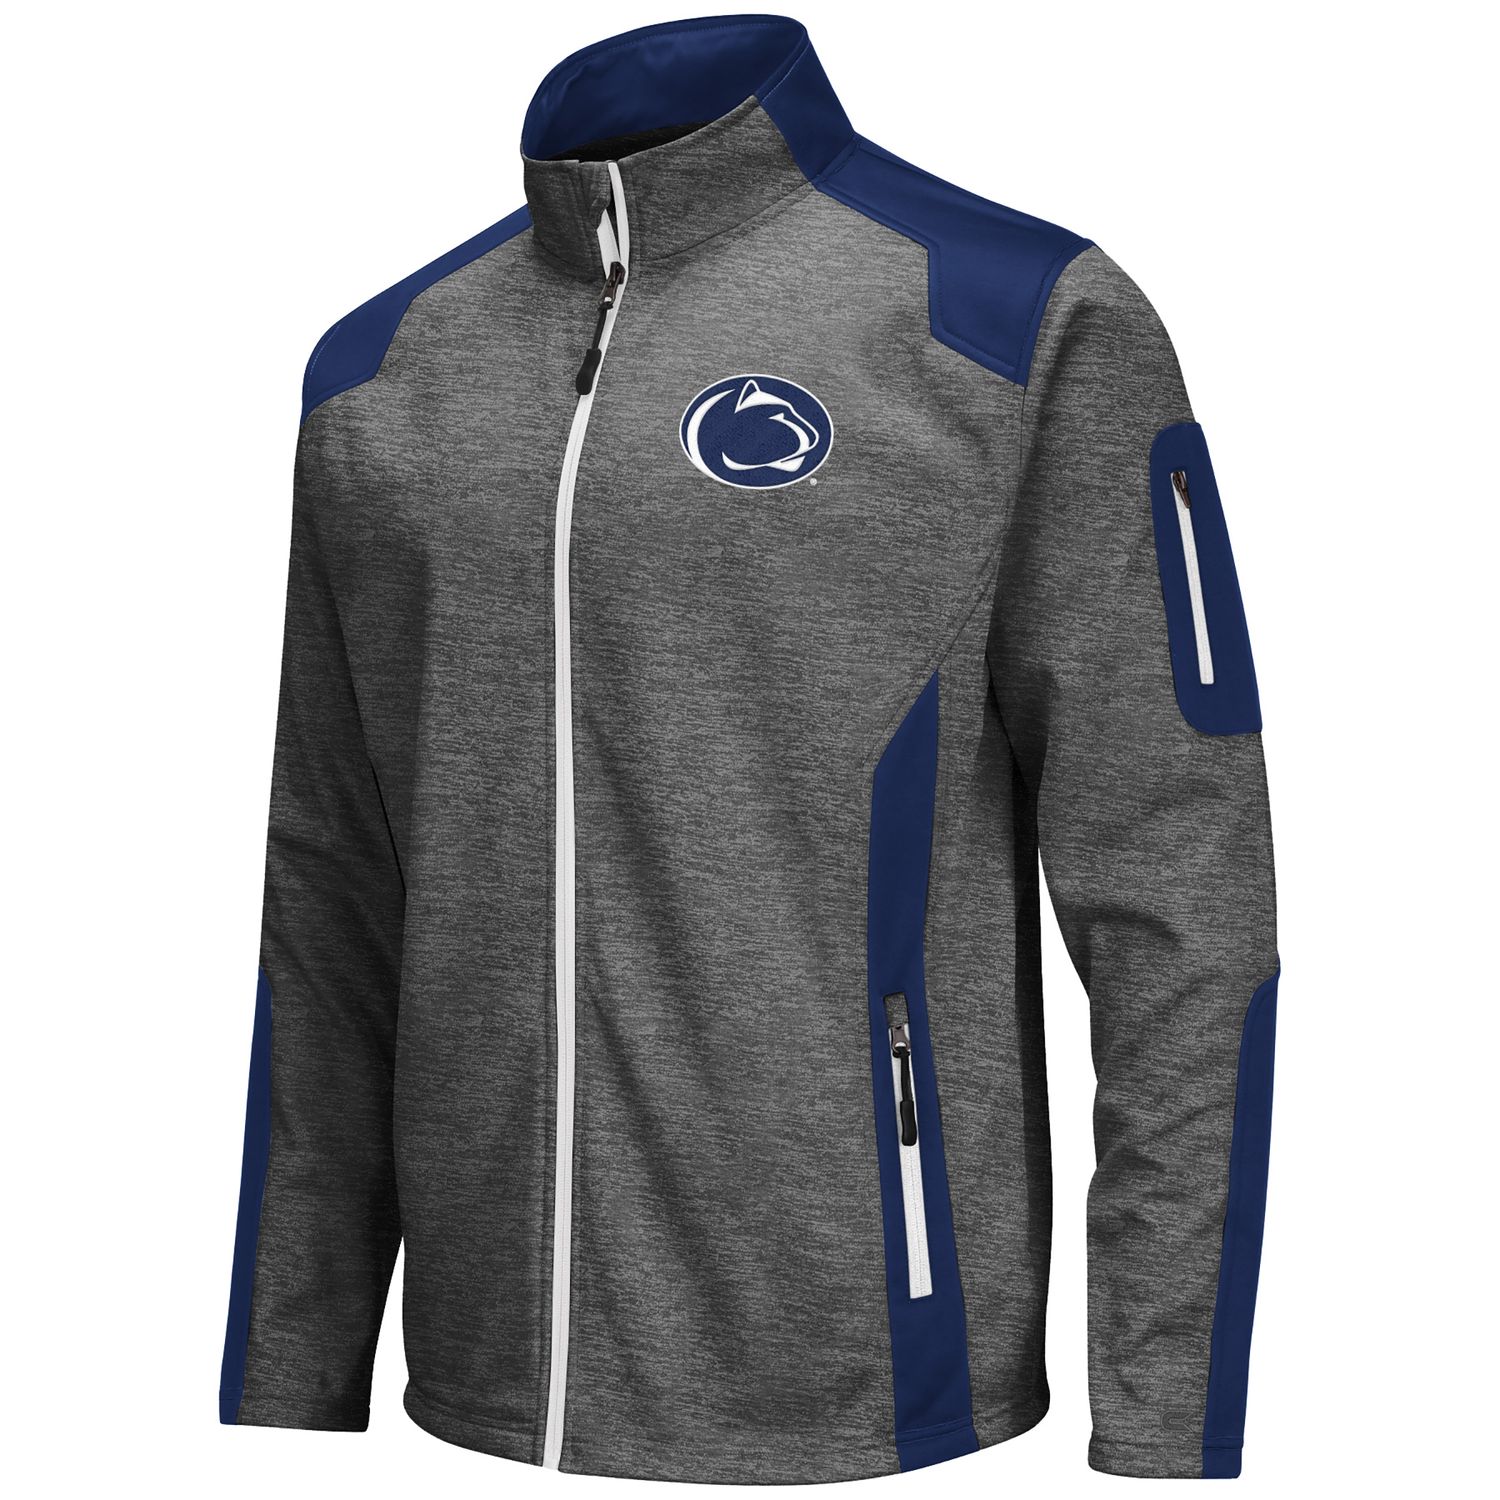 penn state bicycle jersey